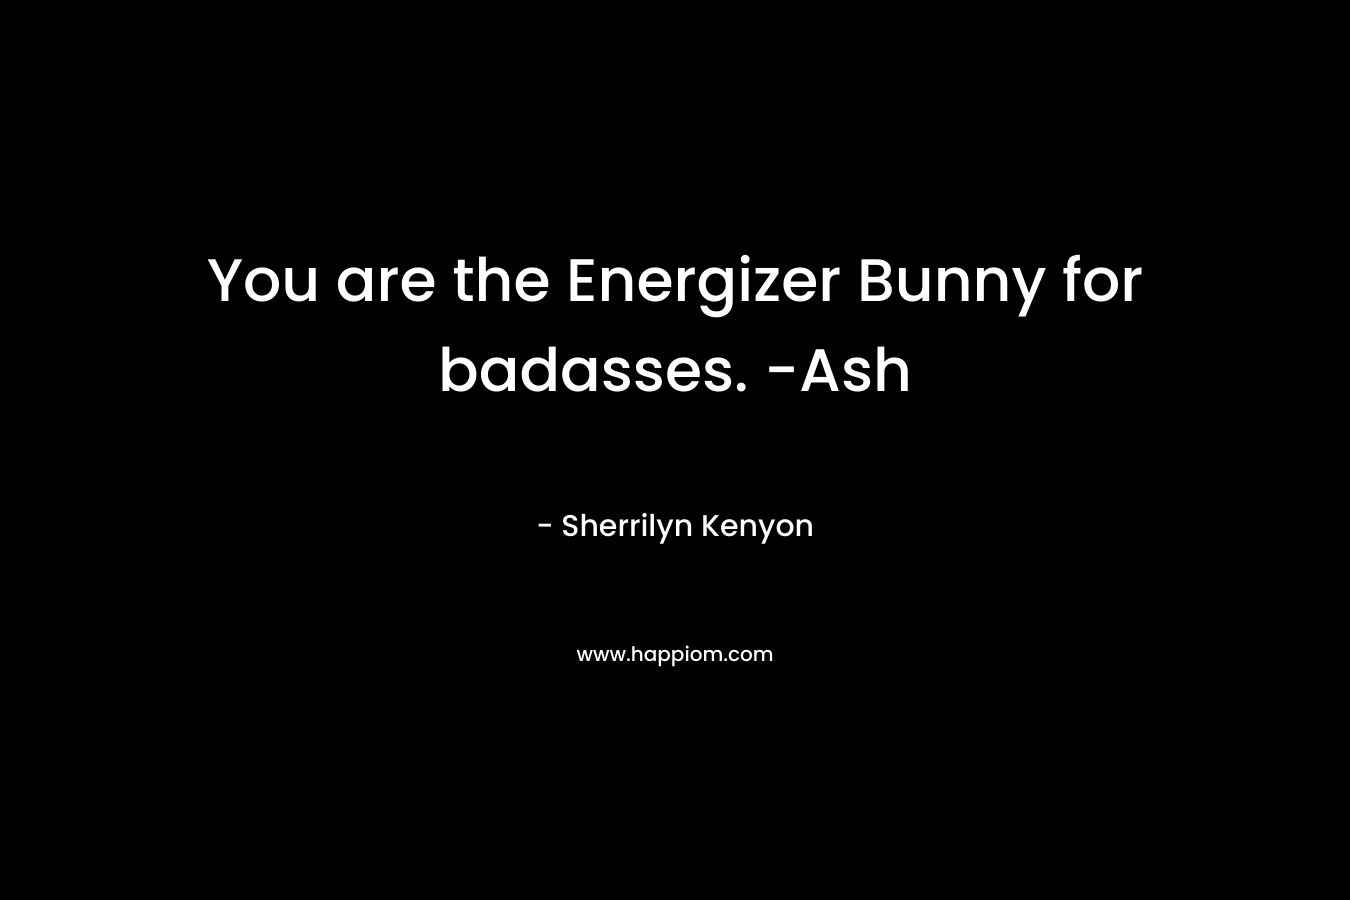 You are the Energizer Bunny for badasses. -Ash – Sherrilyn Kenyon